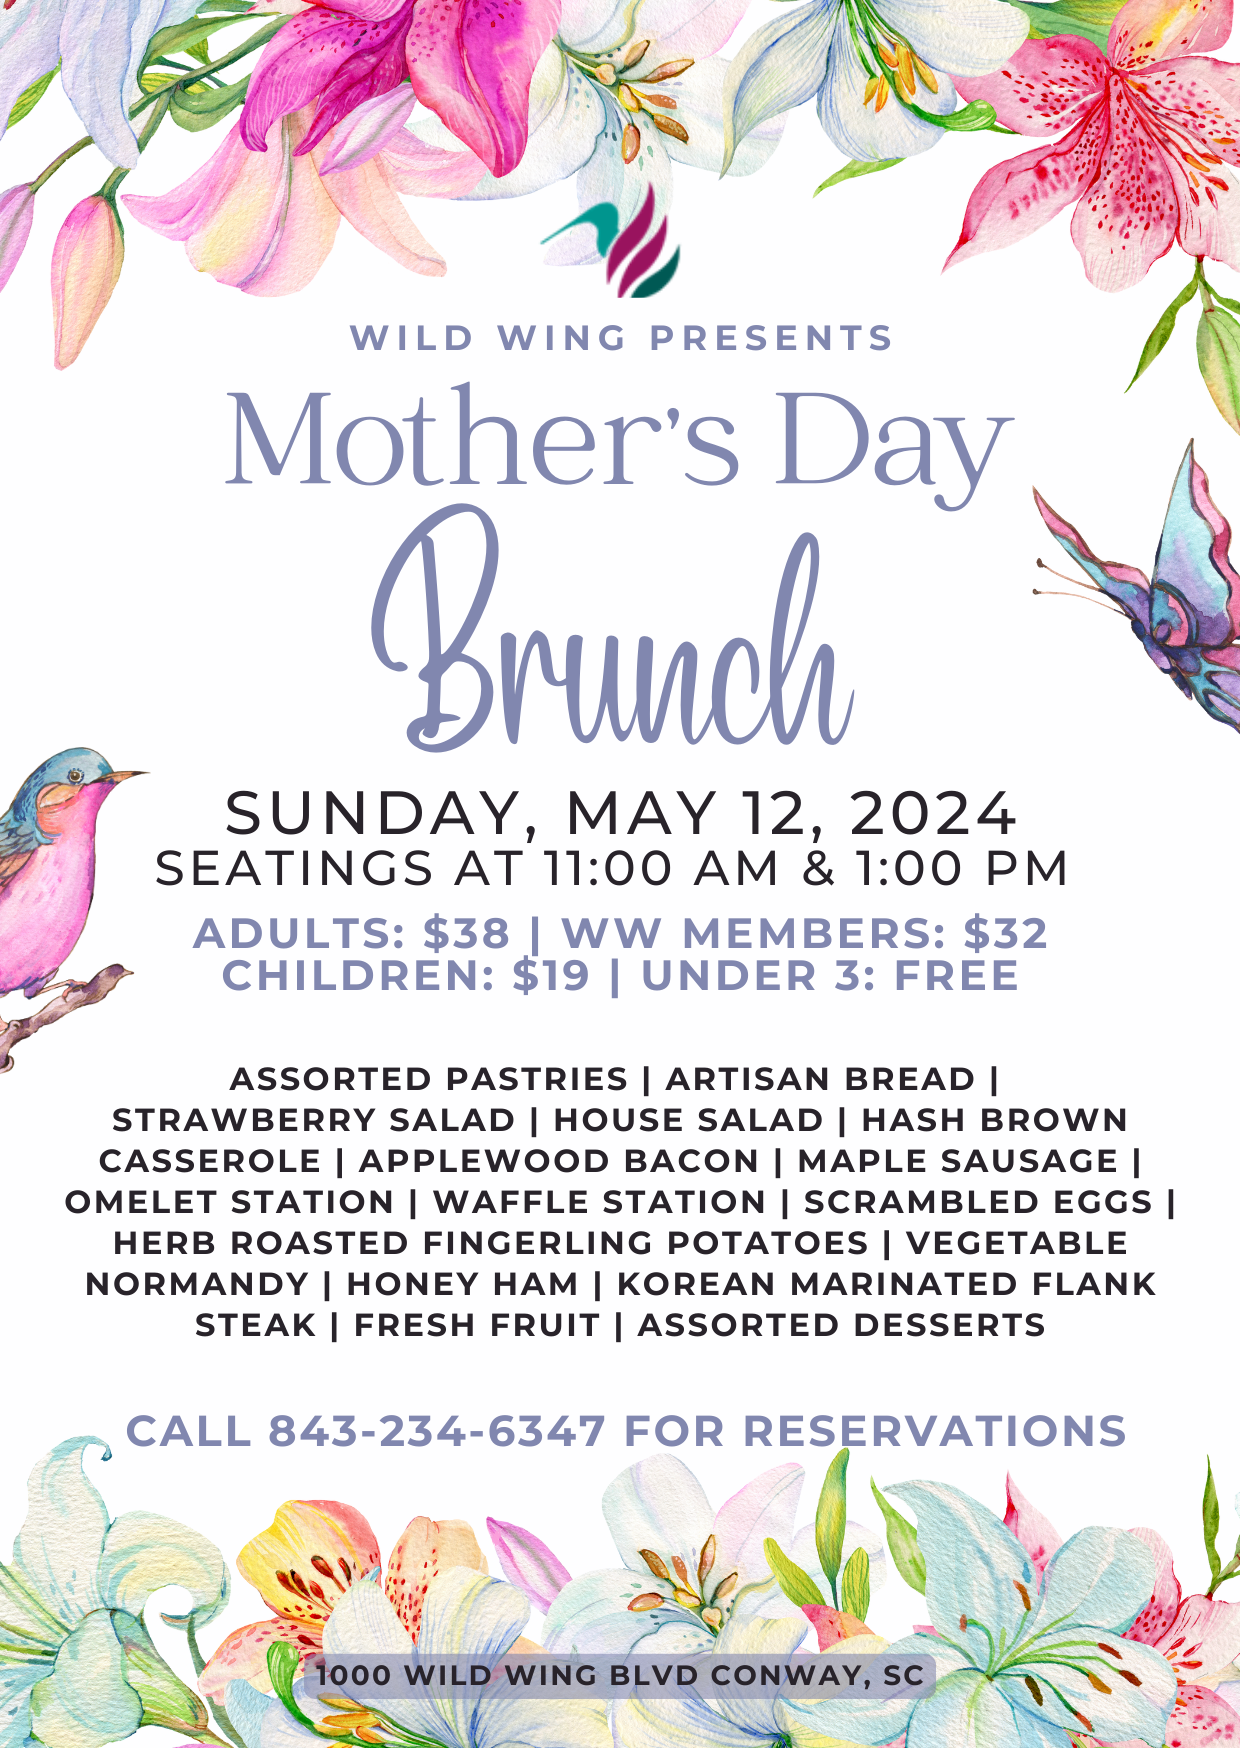 Image: Wild Wing Mother's Day Brunch